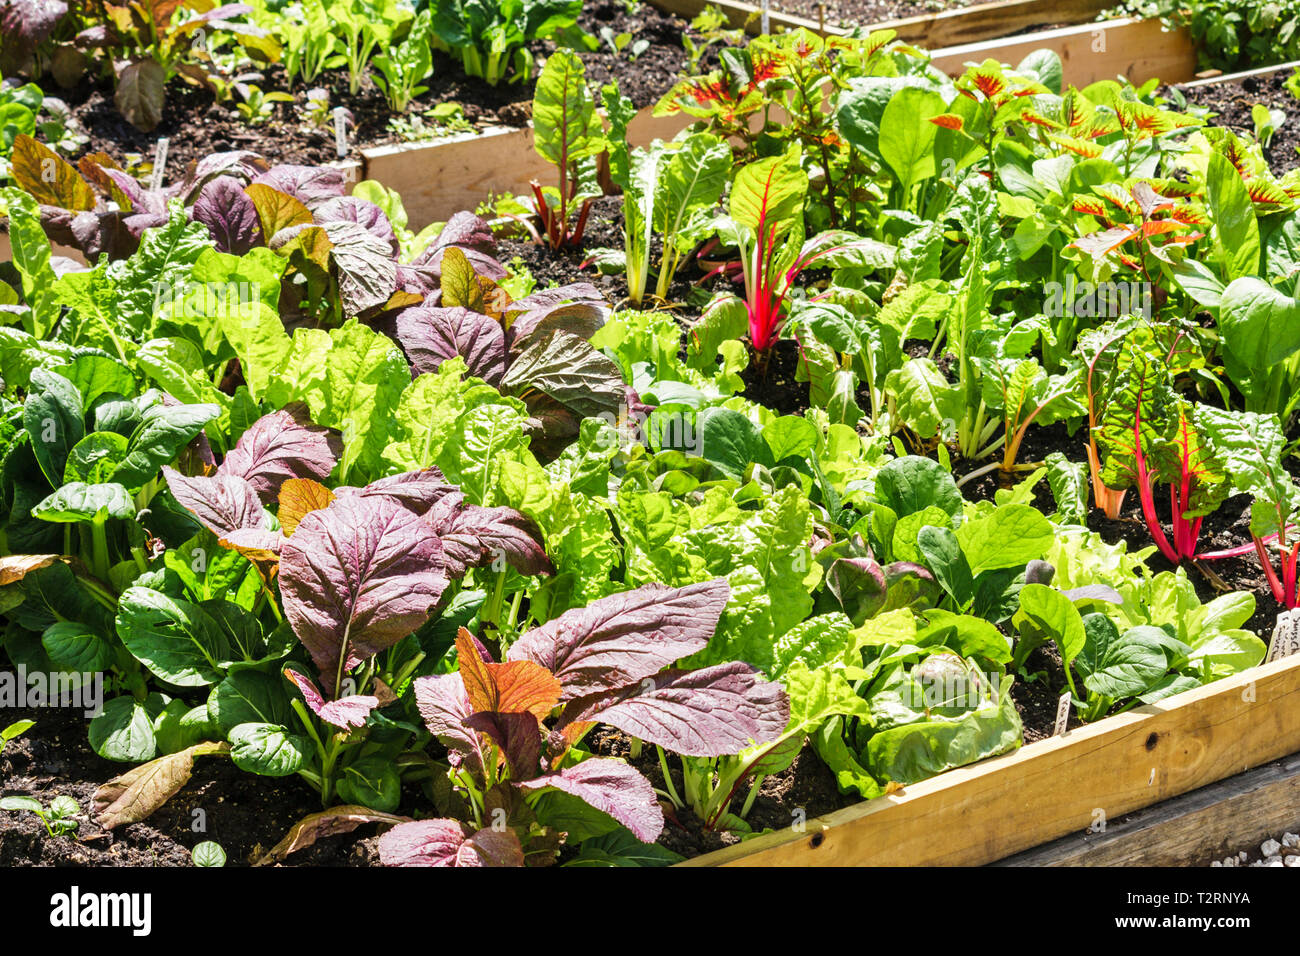 Miami Beach Florida,Victory Community Garden,green movement,global,warming,council,horticulture,gardening,leafy,lettuce,organic,growing,plant,FL090403 Stock Photo